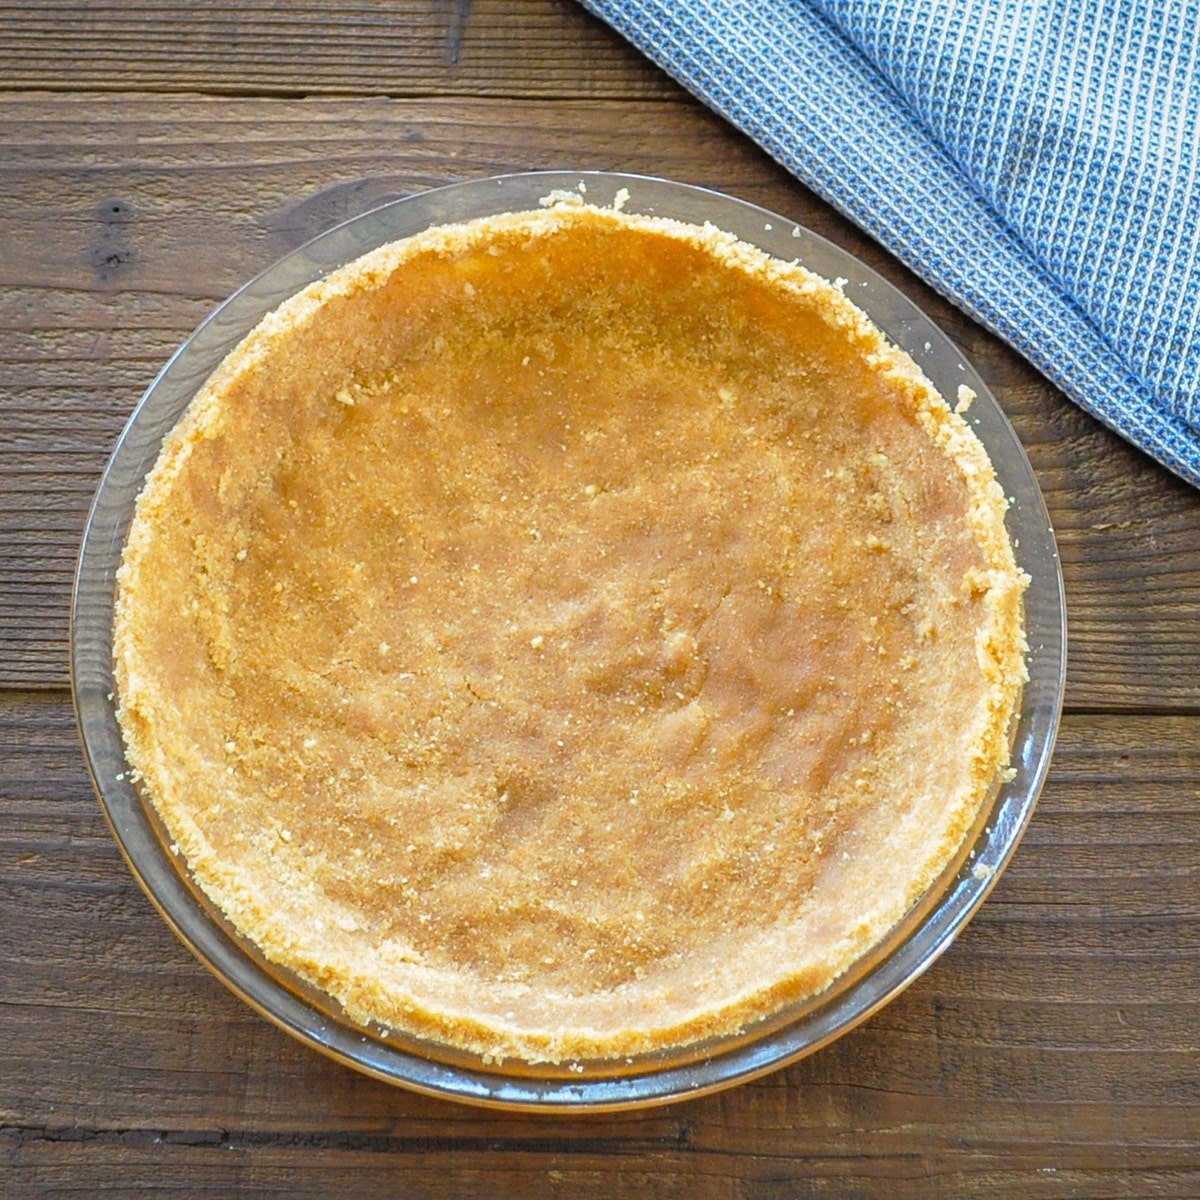 nilla wafer pie crust ingredients pressed into a pie plate